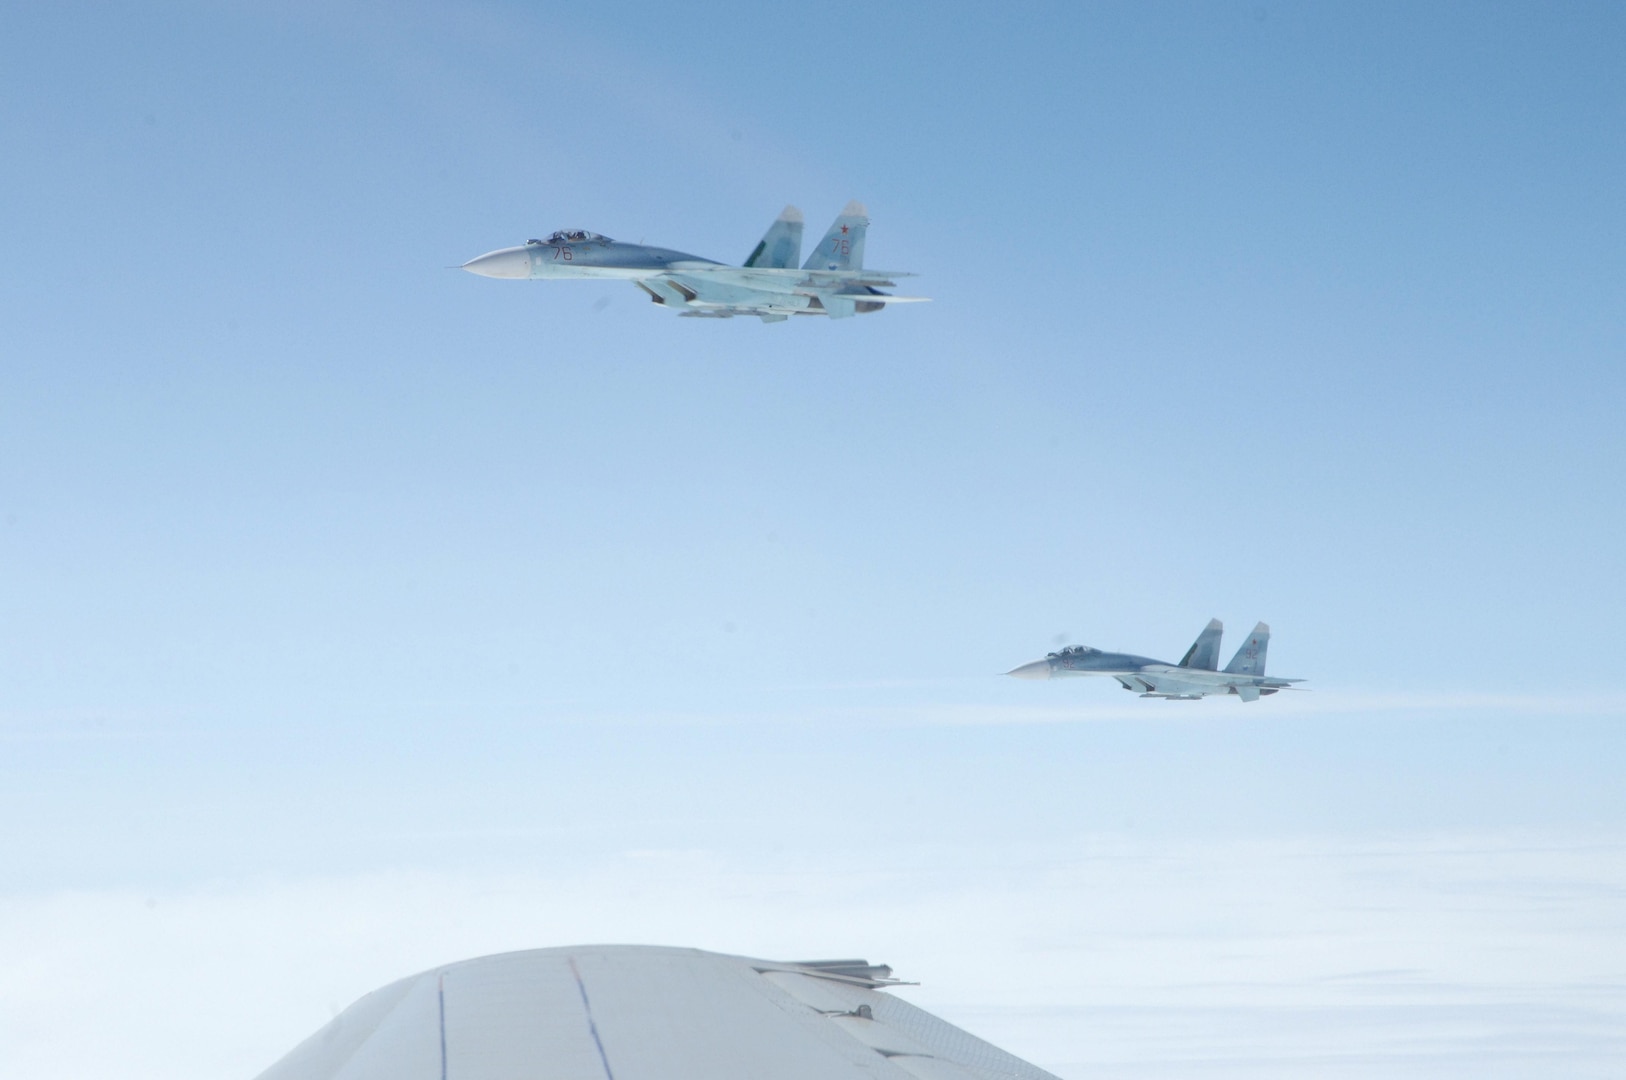 OVER THE PACIFIC OCEAN – A pair of SU-27 fighters escorts a simulated hijacked airliner during the second day of flying for Exercise Vigilant Eagle Aug. 9, 2011. The Russian fighters followed and monitored the aircraft while it was in Russian airspace, handing it over to U.S. F-15 fighters from Elmendorf Air Force Base, Alaska, when it entered U.S. airspace. (U.S. Air Force photo by Tech. Sgt. Thomas J. Doscher)

